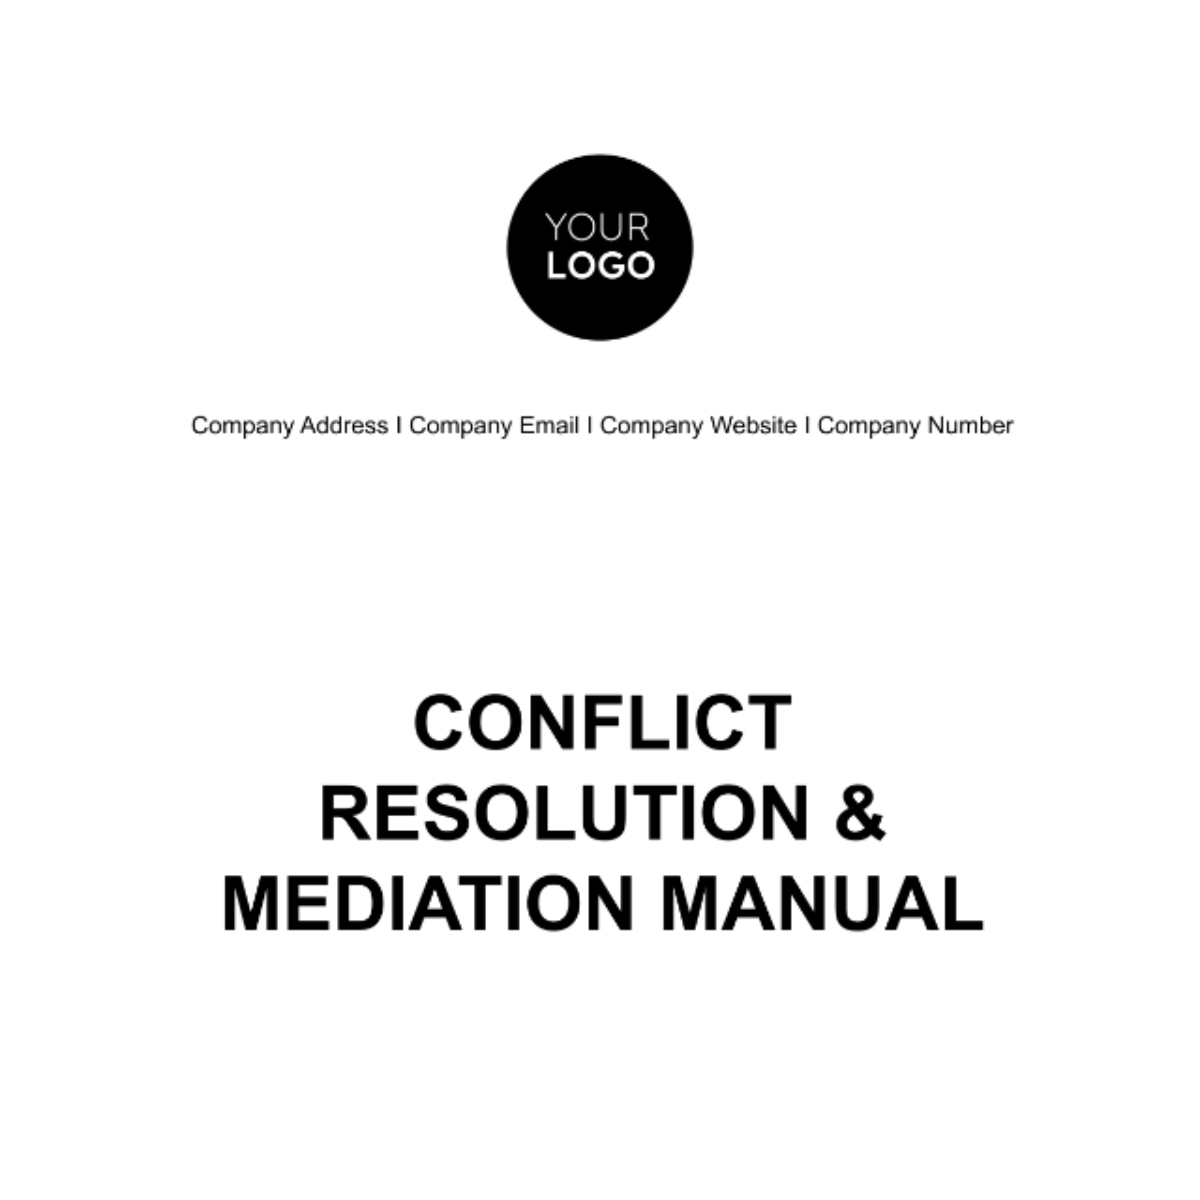 Free Conflict Resolution & Mediation Manual HR Template